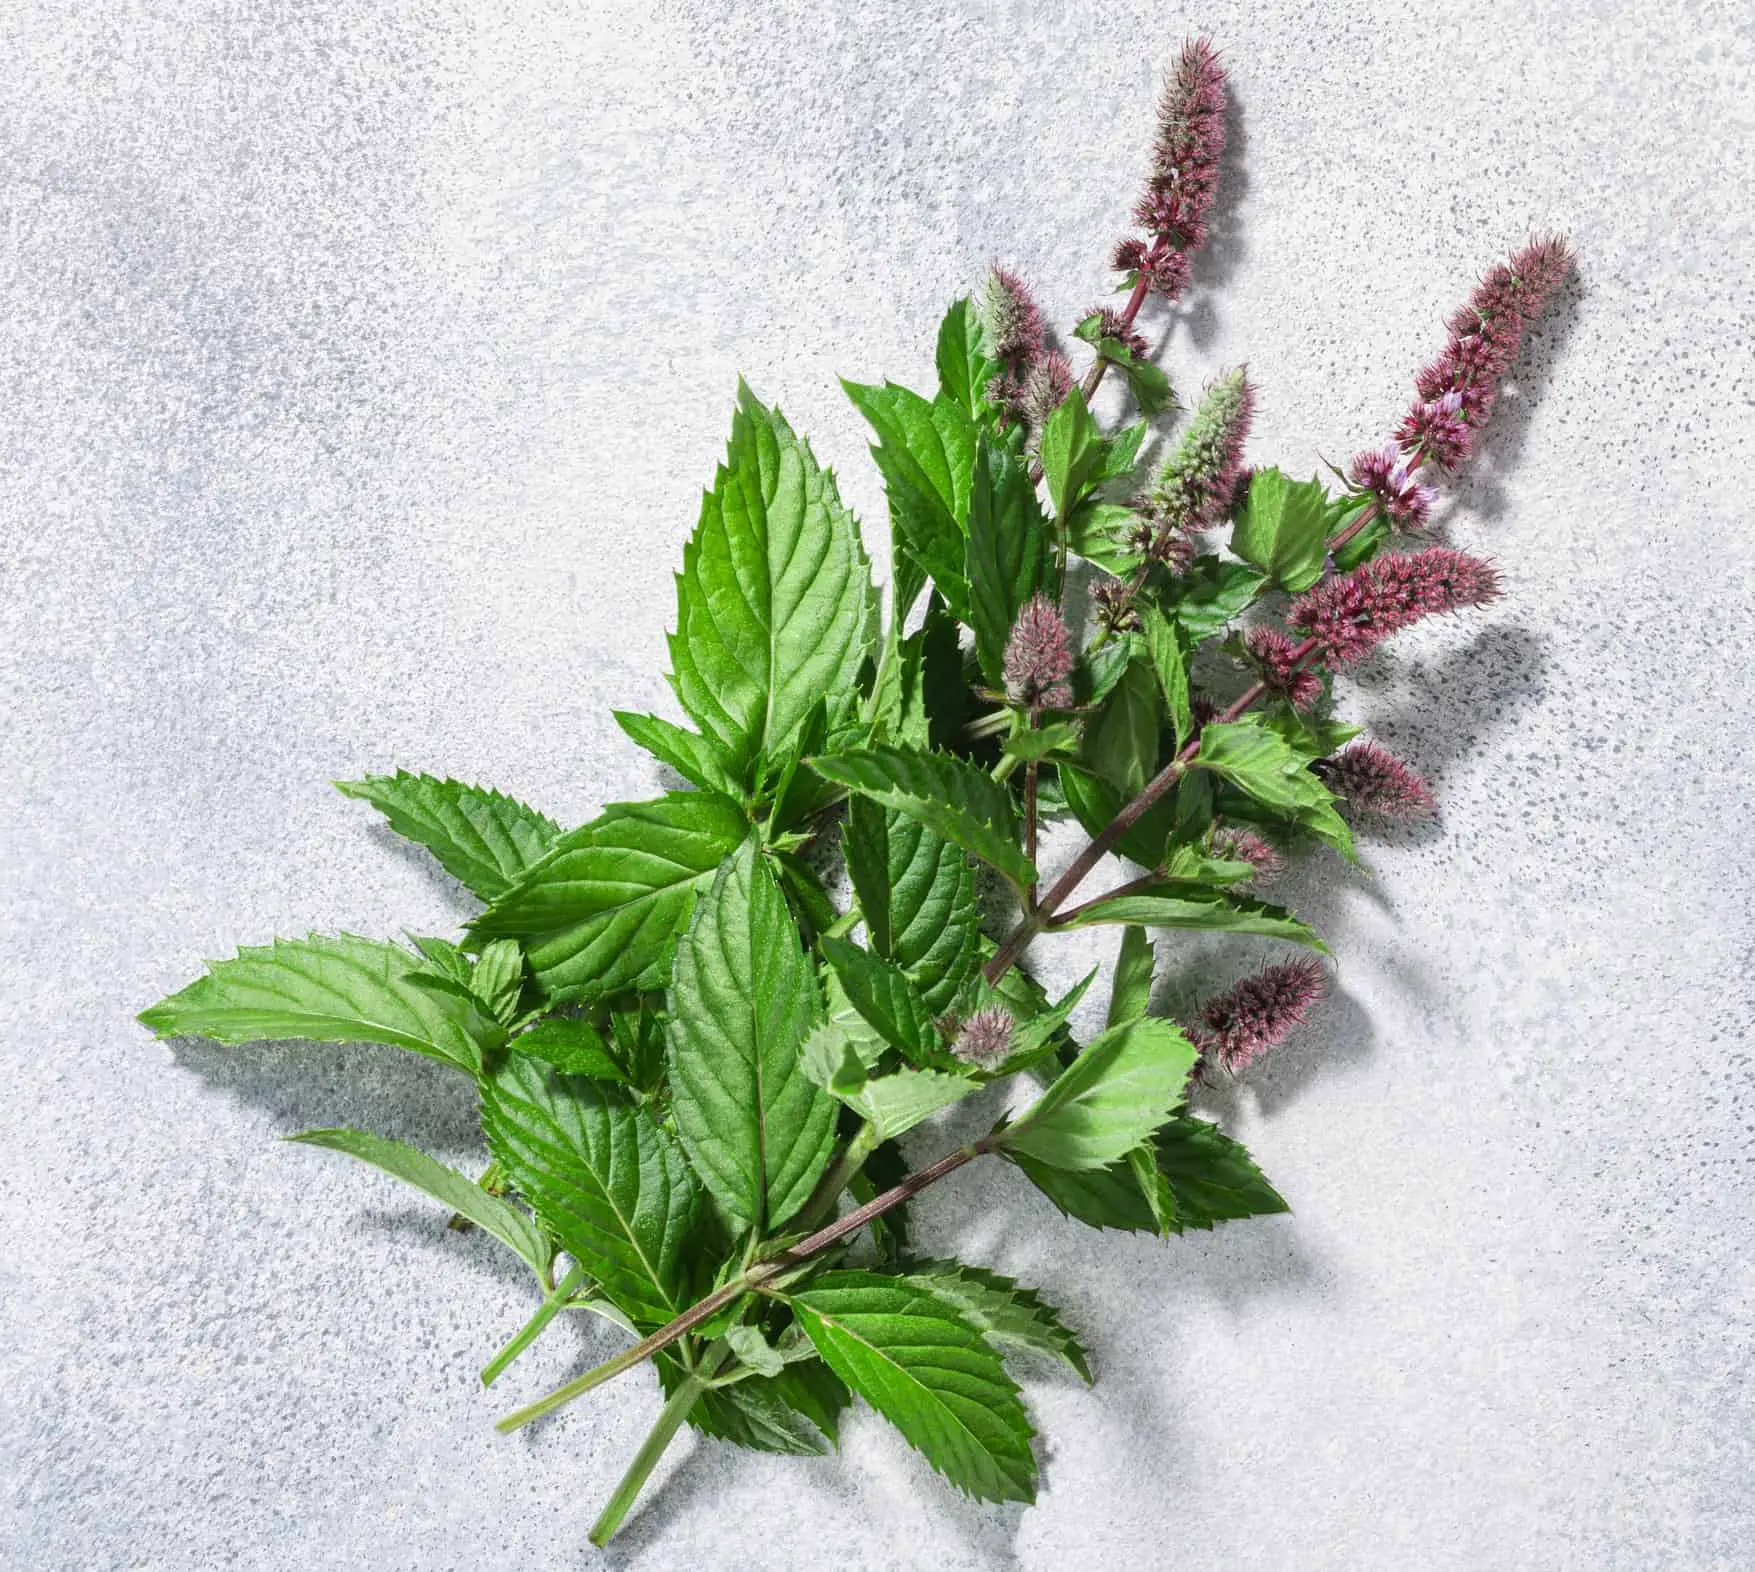 Spearmint (Mentha spicata) is a species similar to the common nettle